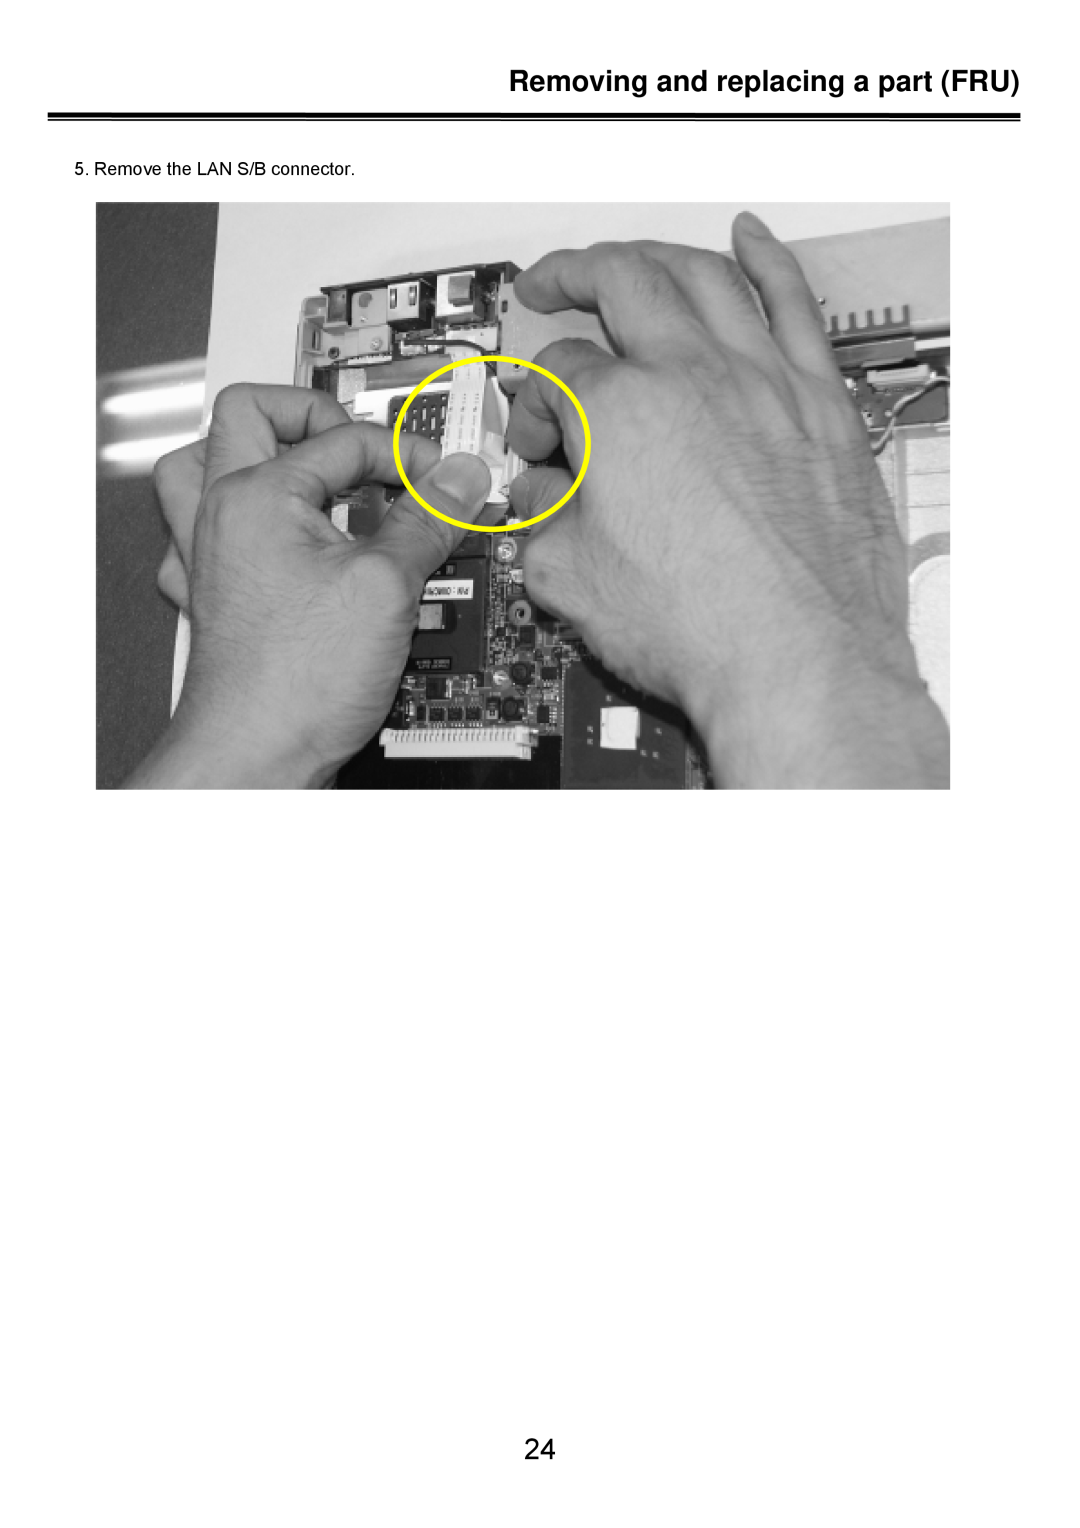 LG Electronics LS50 service manual Remove the LAN S/B connector, Removing and replacing a part FRU 